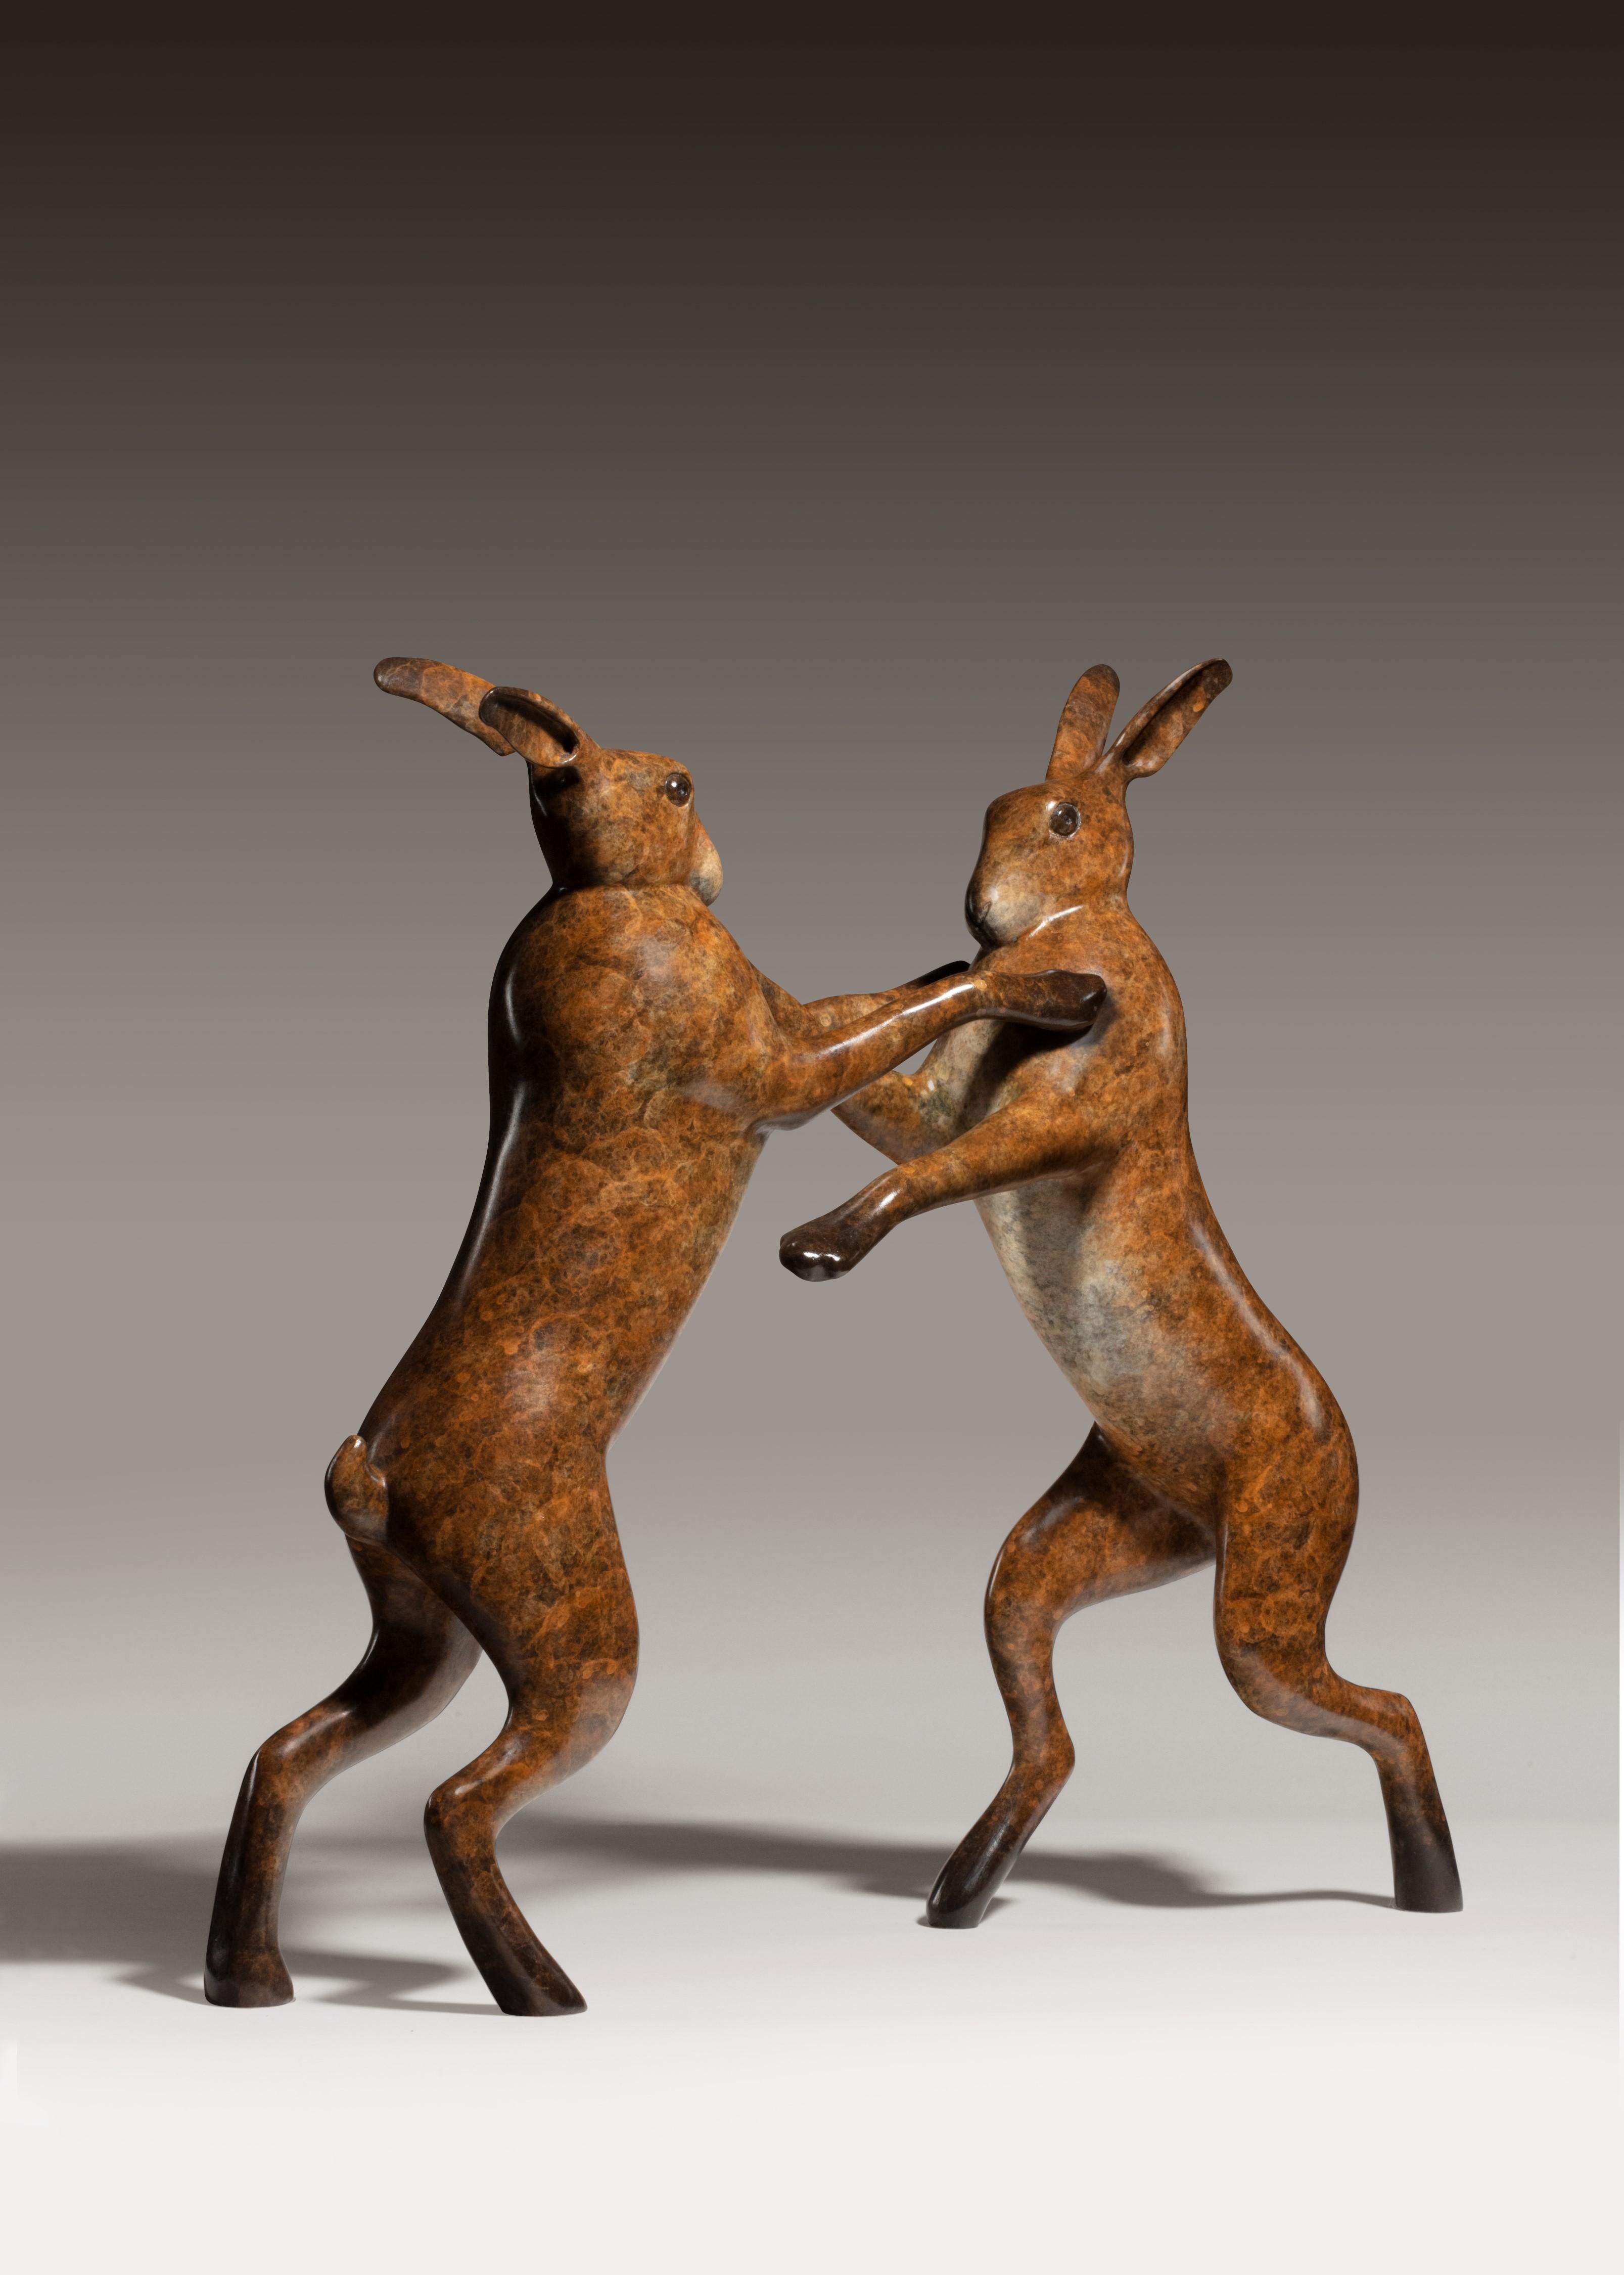 hares fighting